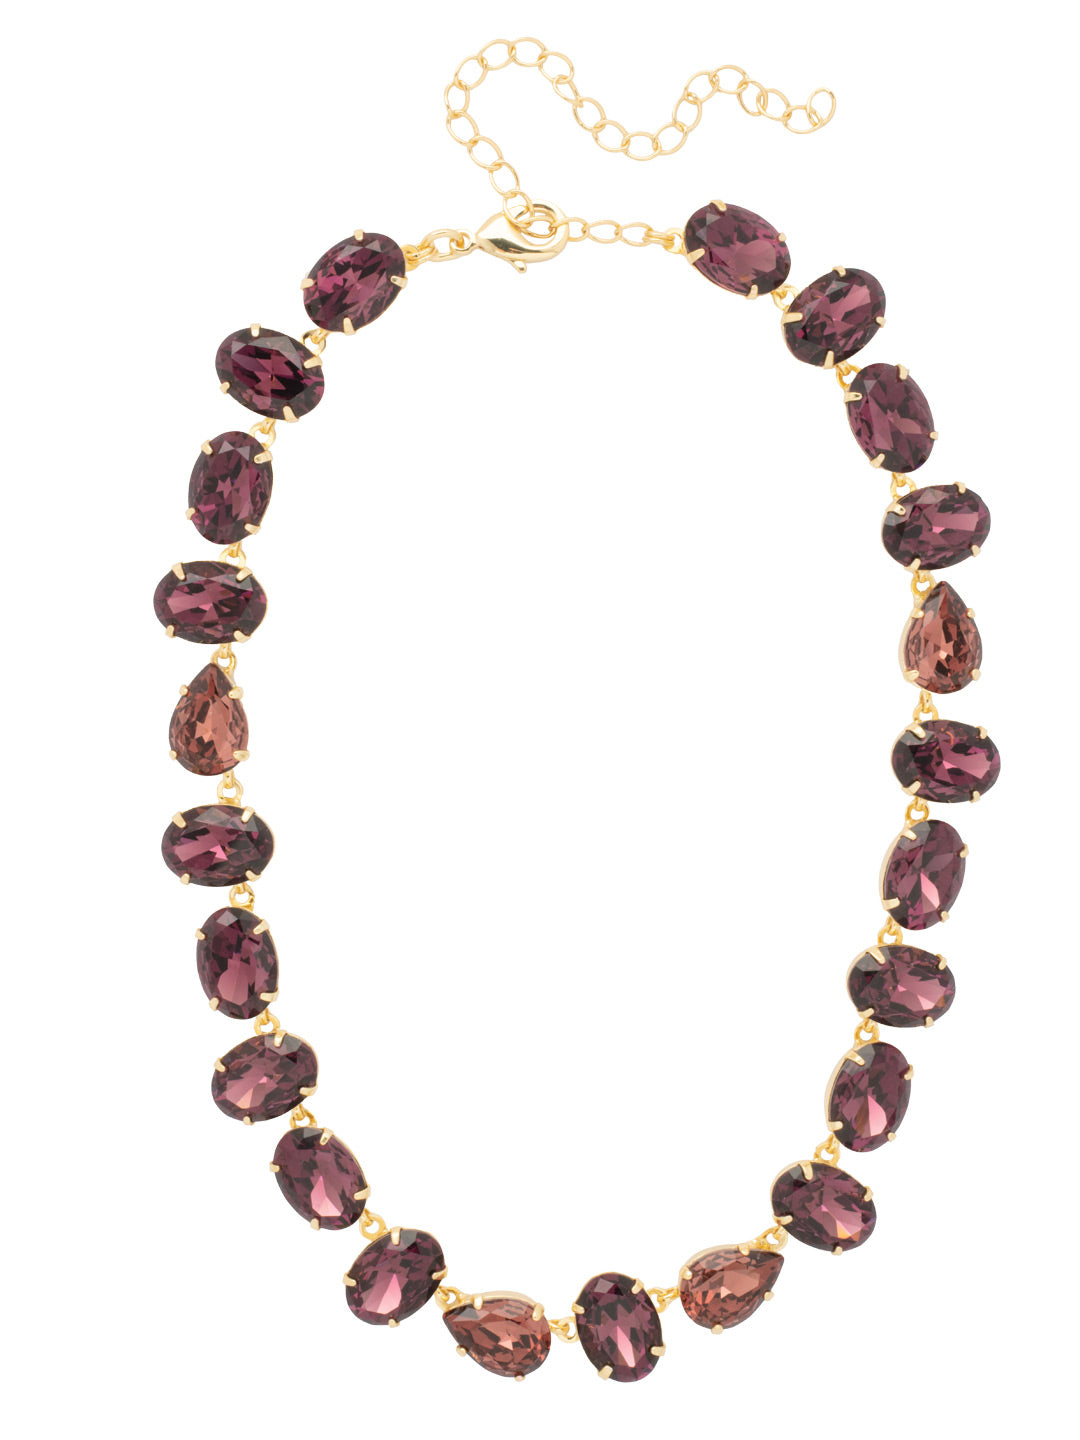 Michelle Statement Necklace - NFL10BGMRL - <p>The Michelle Statement Necklace features alternating pear and oval cut crystals on an adjustable chain, secured with a lobster claw clasp. From Sorrelli's Merlot collection in our Bright Gold-tone finish.</p>